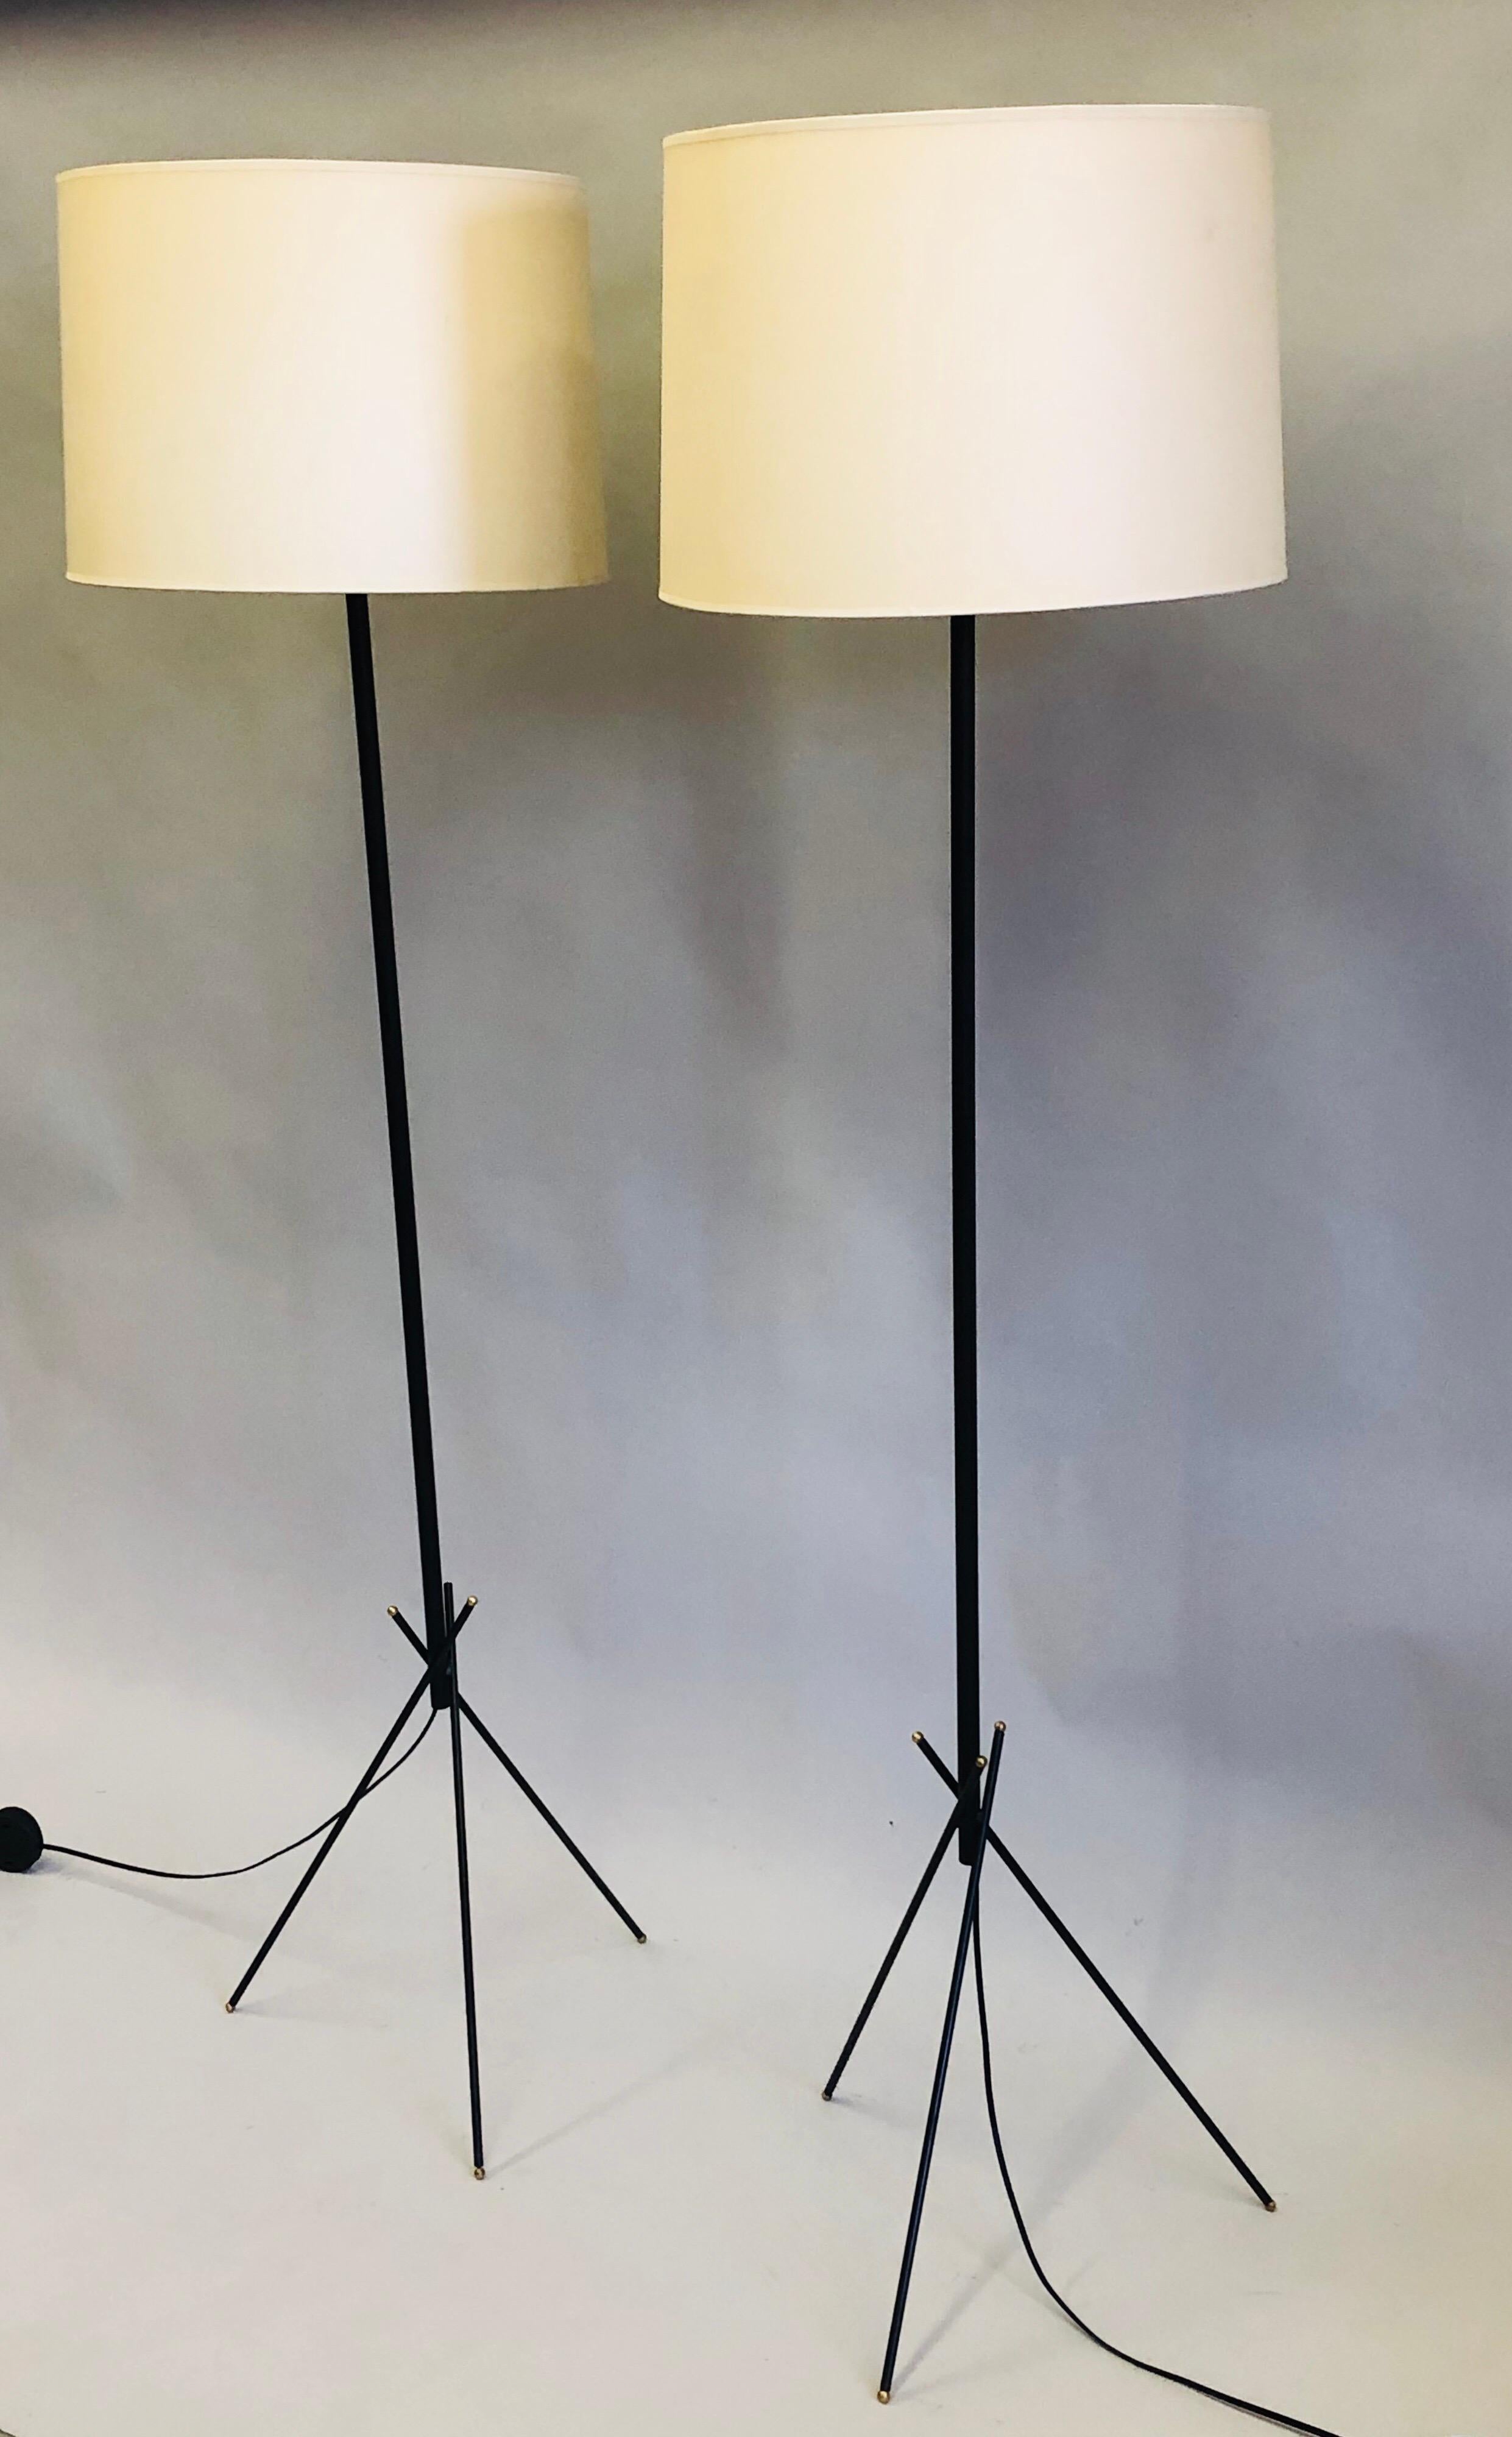 Elegant, pair of French Mid-Century Modern floor lamps in enameled wrought iron with brass ball details attributed to Disderot, circa 1950-1960. The standing lamps are set upon a stunning, architectural base composed of 3 round iron rods that